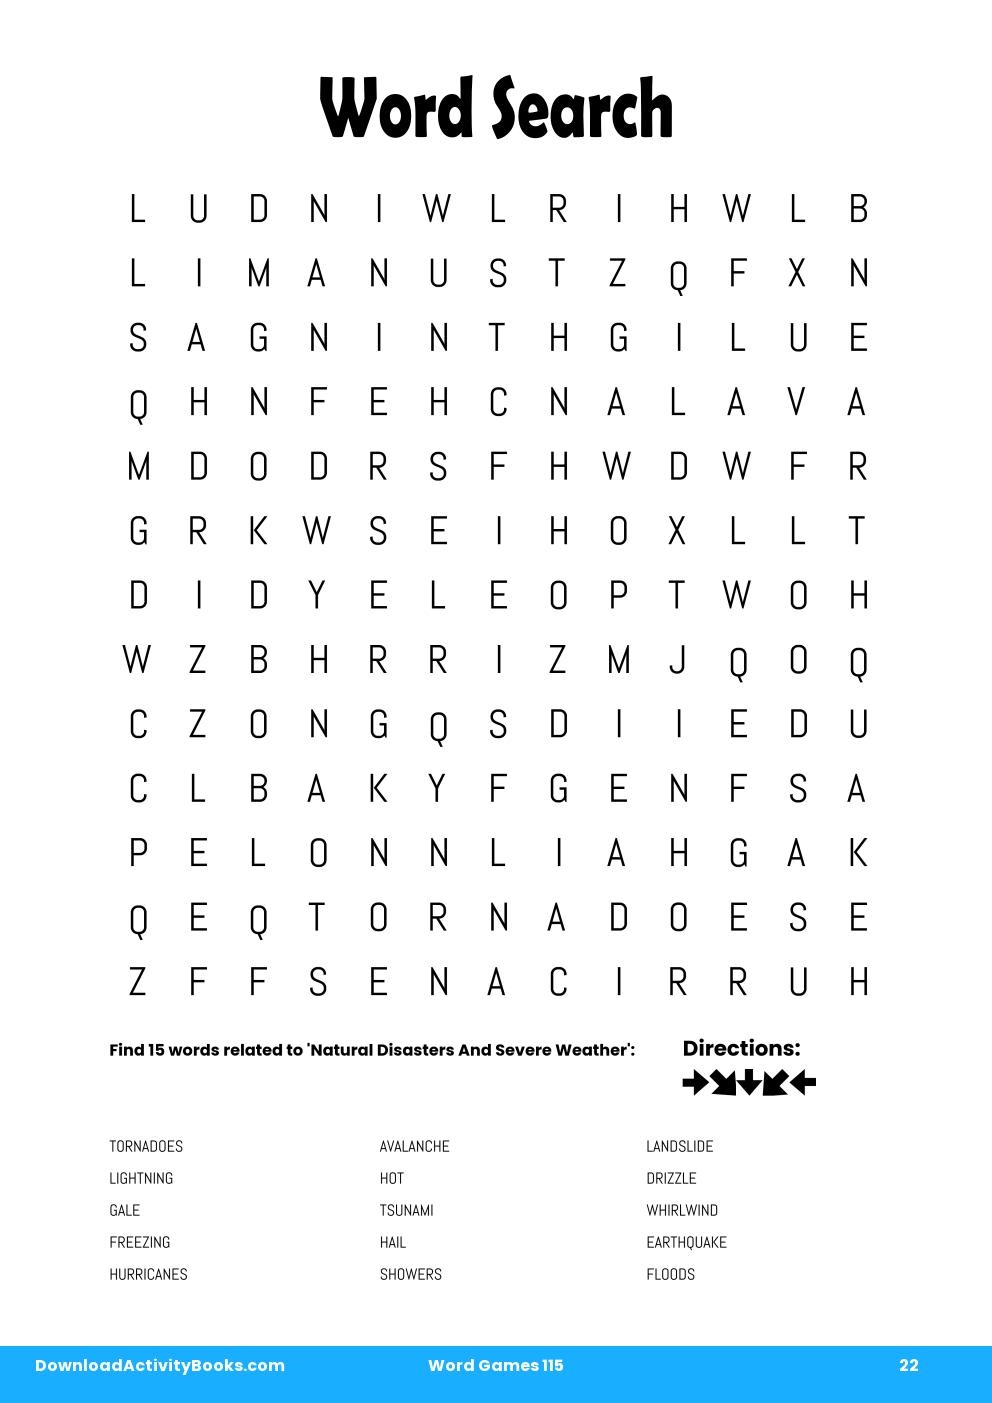 Word Search in Word Games 115